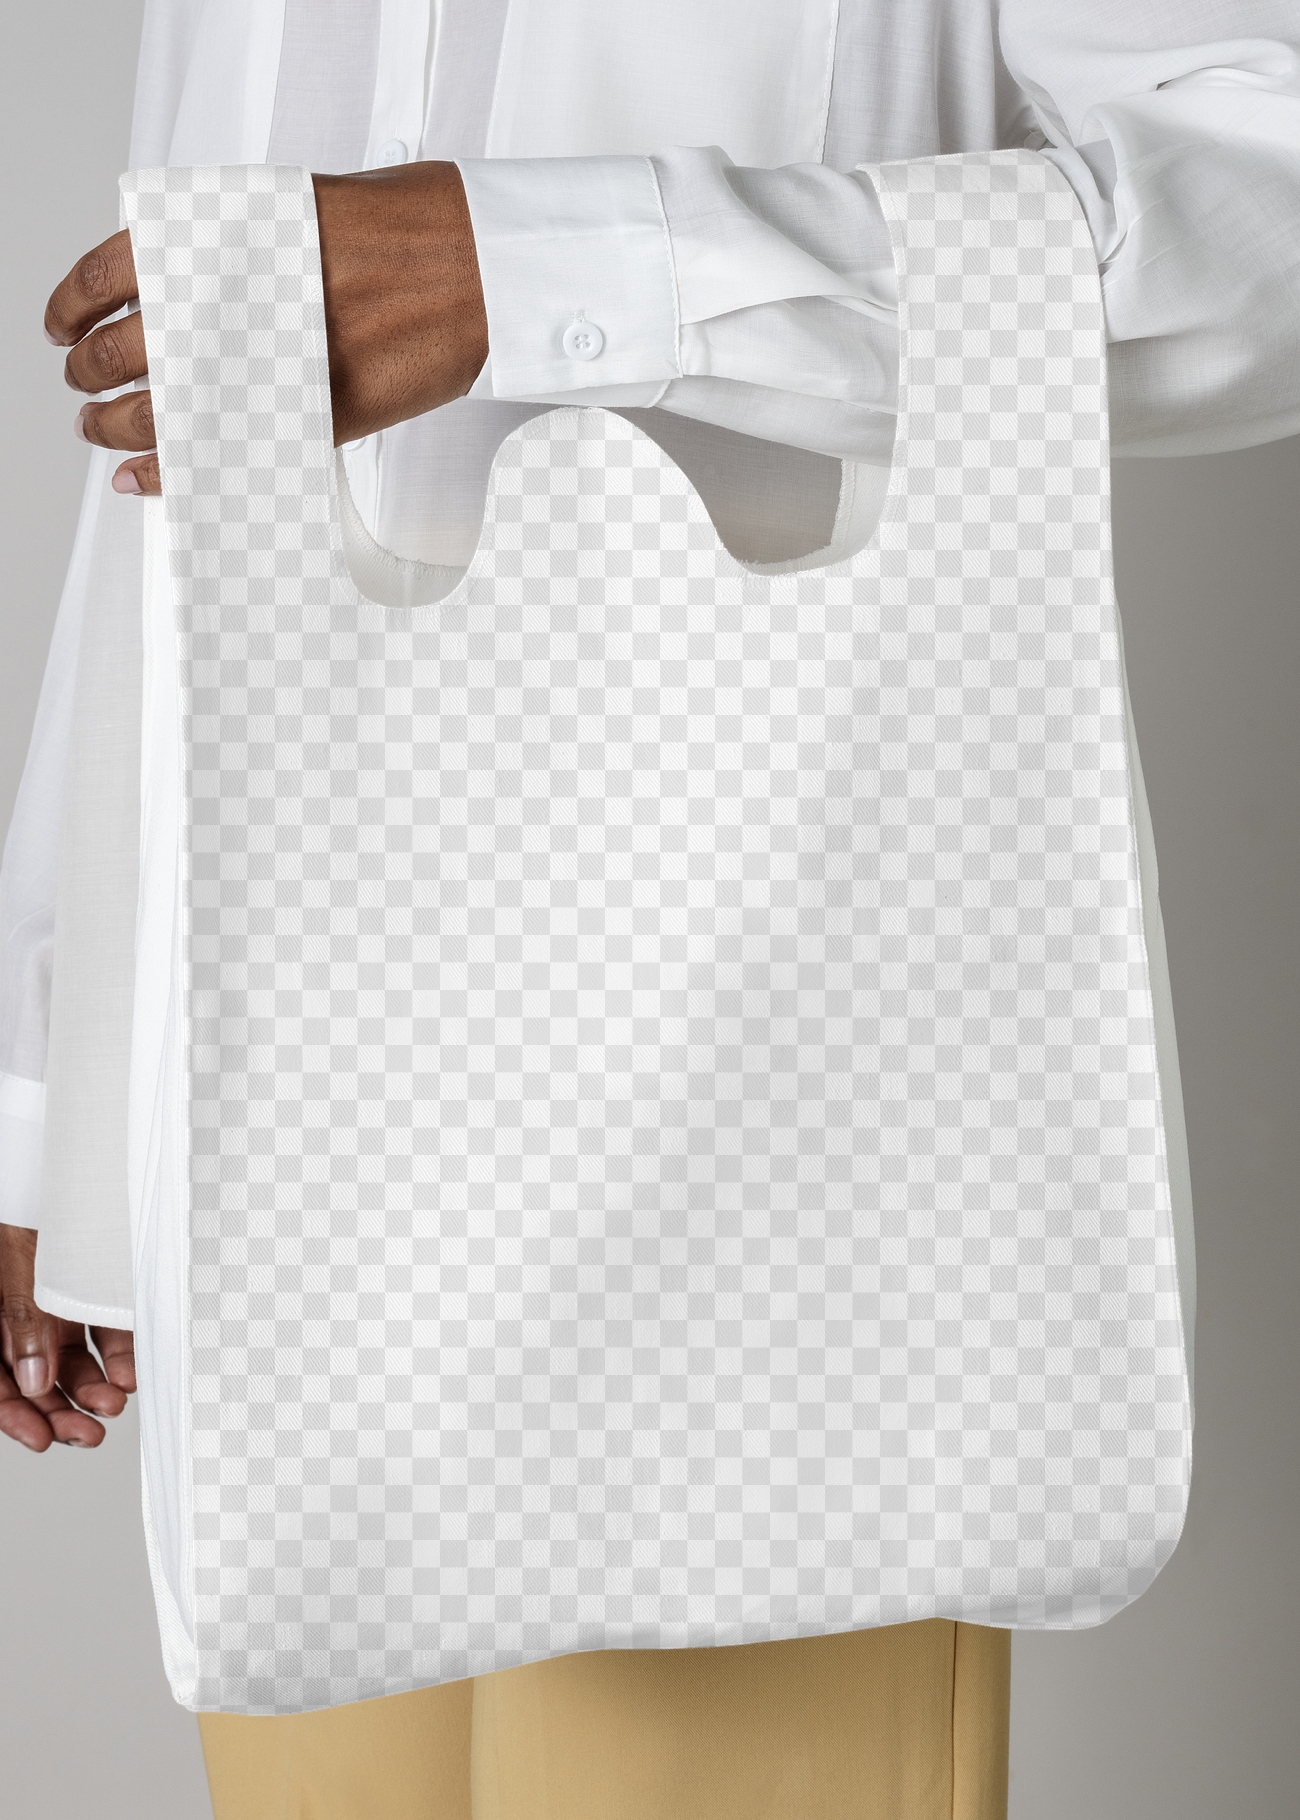 Download Black woman carrying a white reusable grocery bag mockup